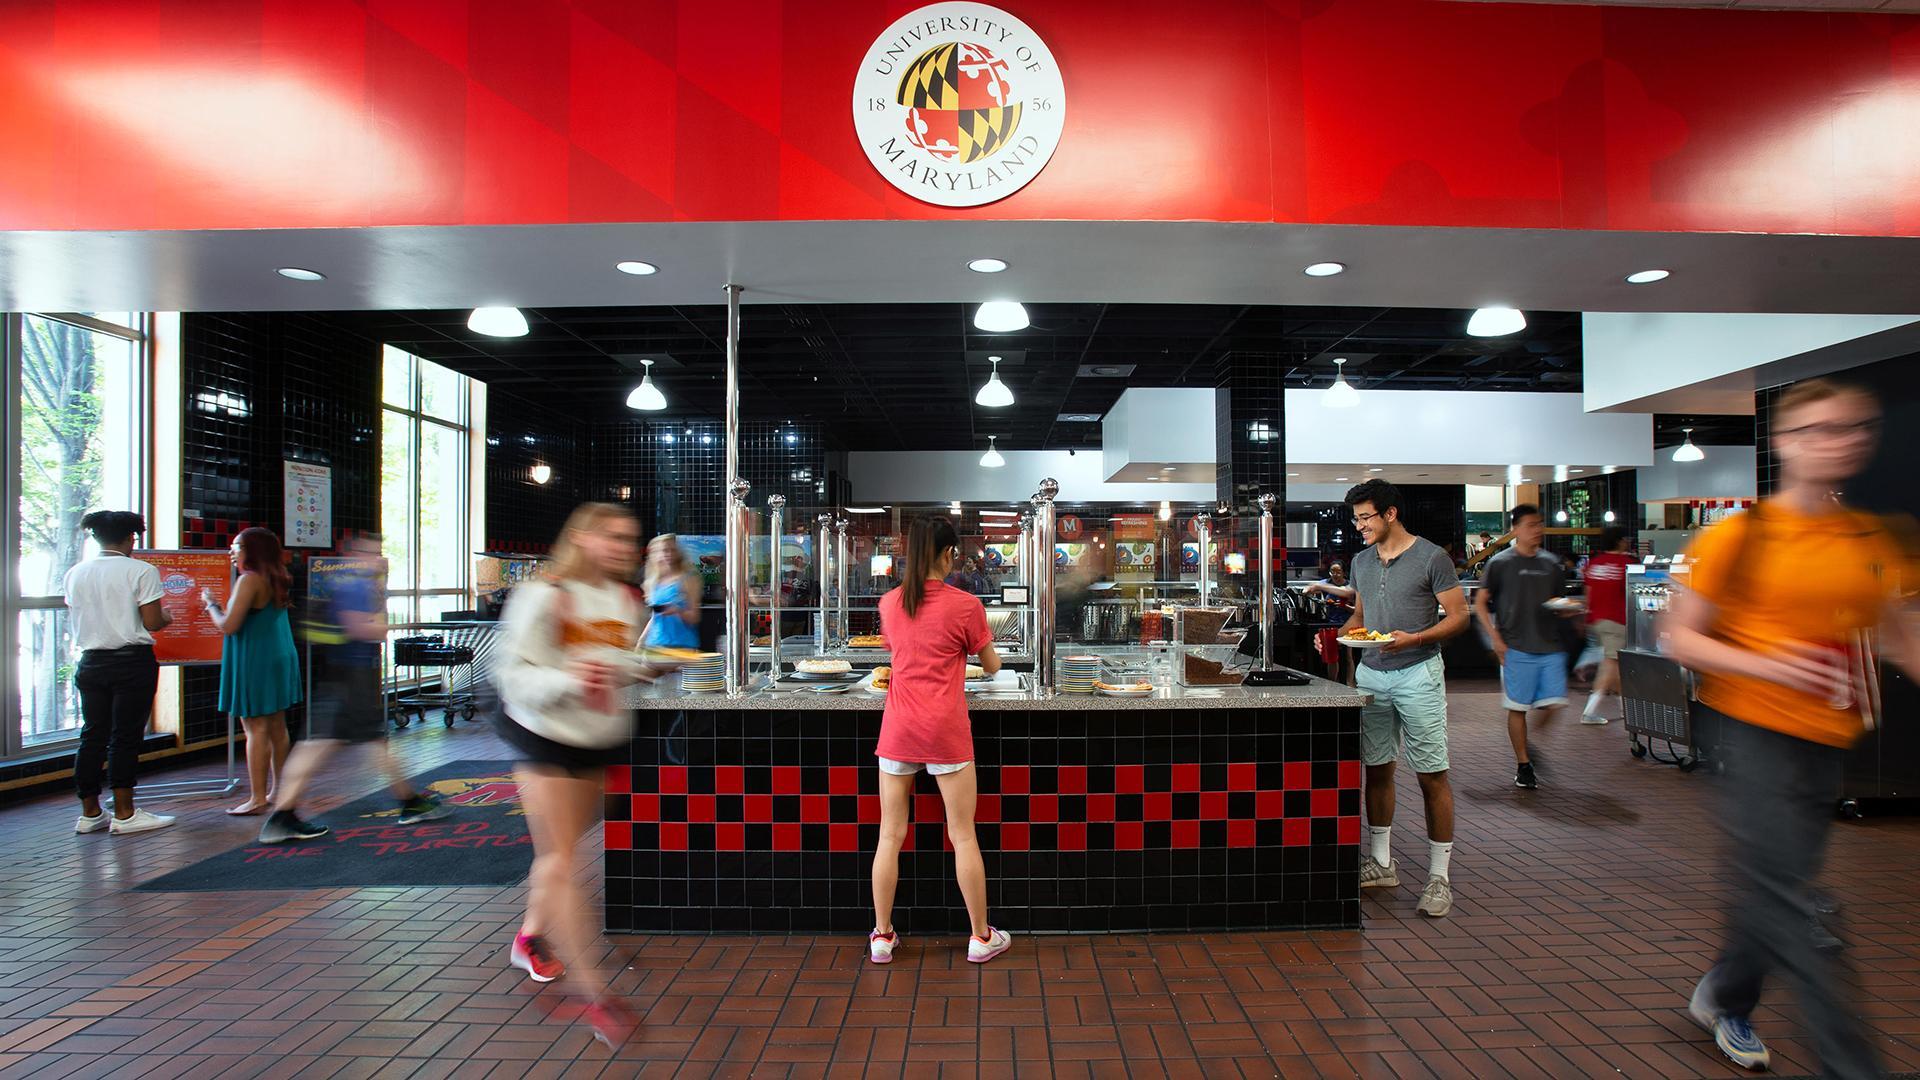 Students in UMD's South Campus dining hall (2019)